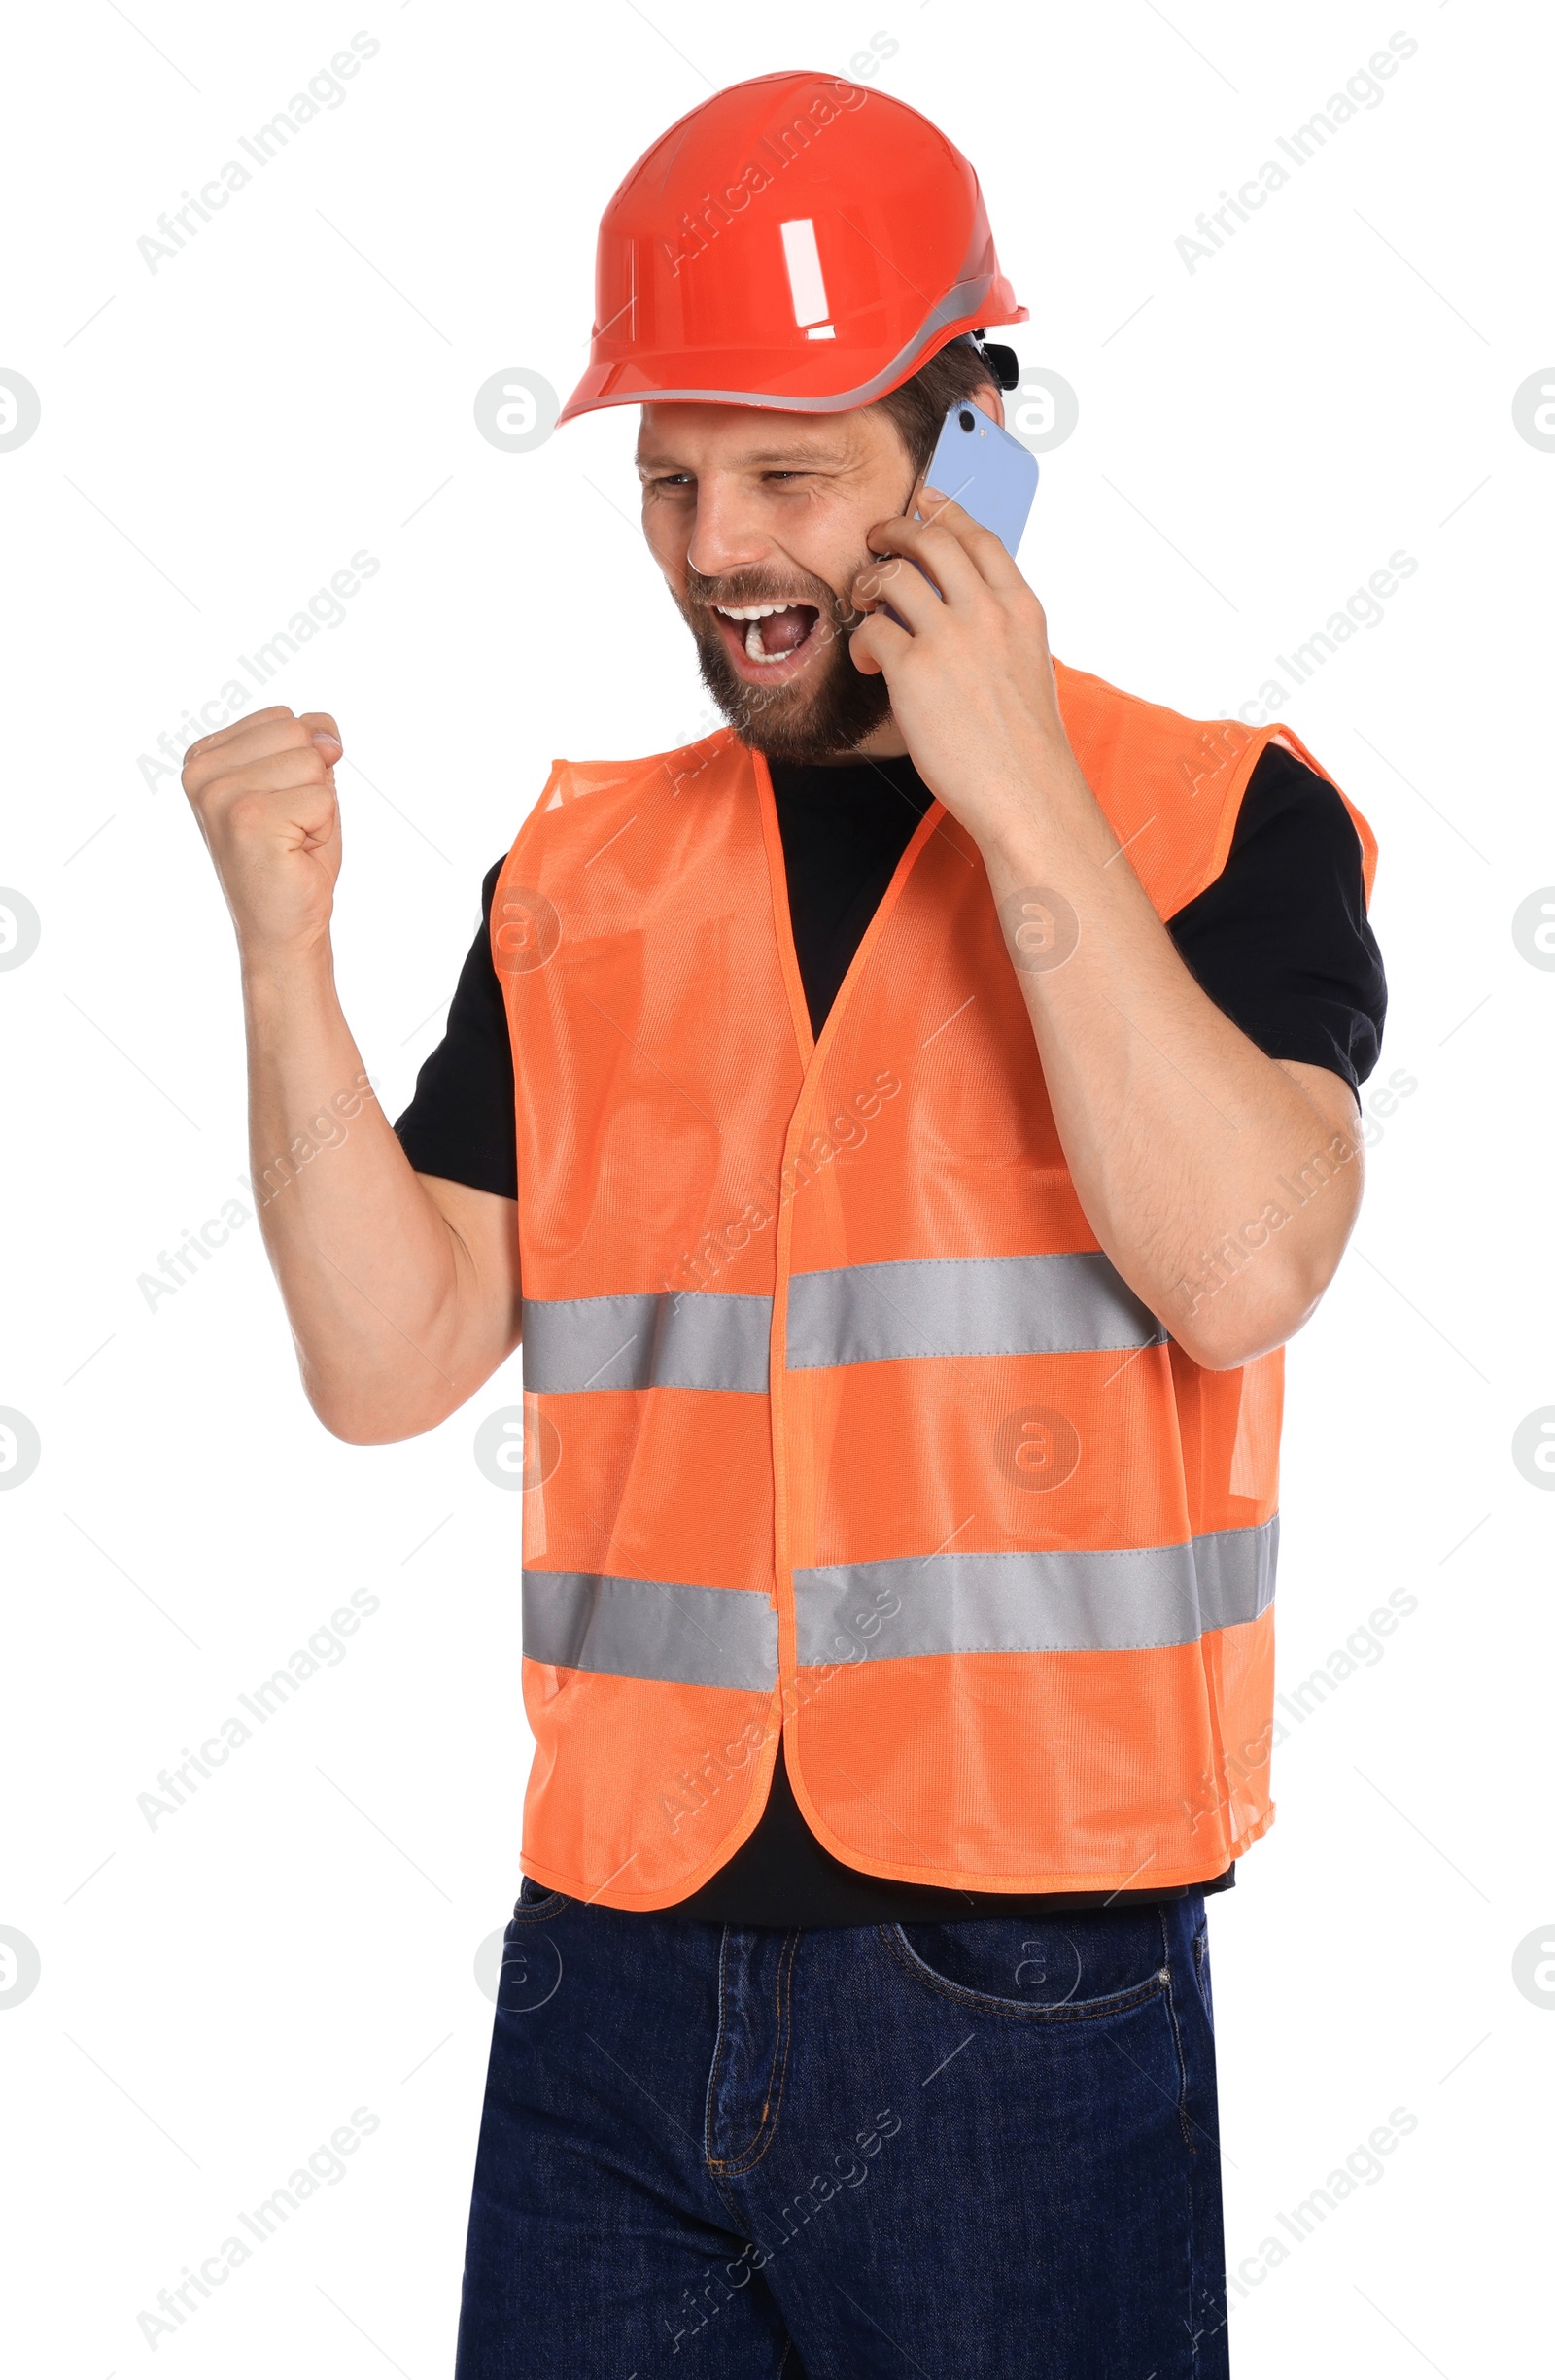 Photo of Man in reflective uniform talking on smartphone against white background